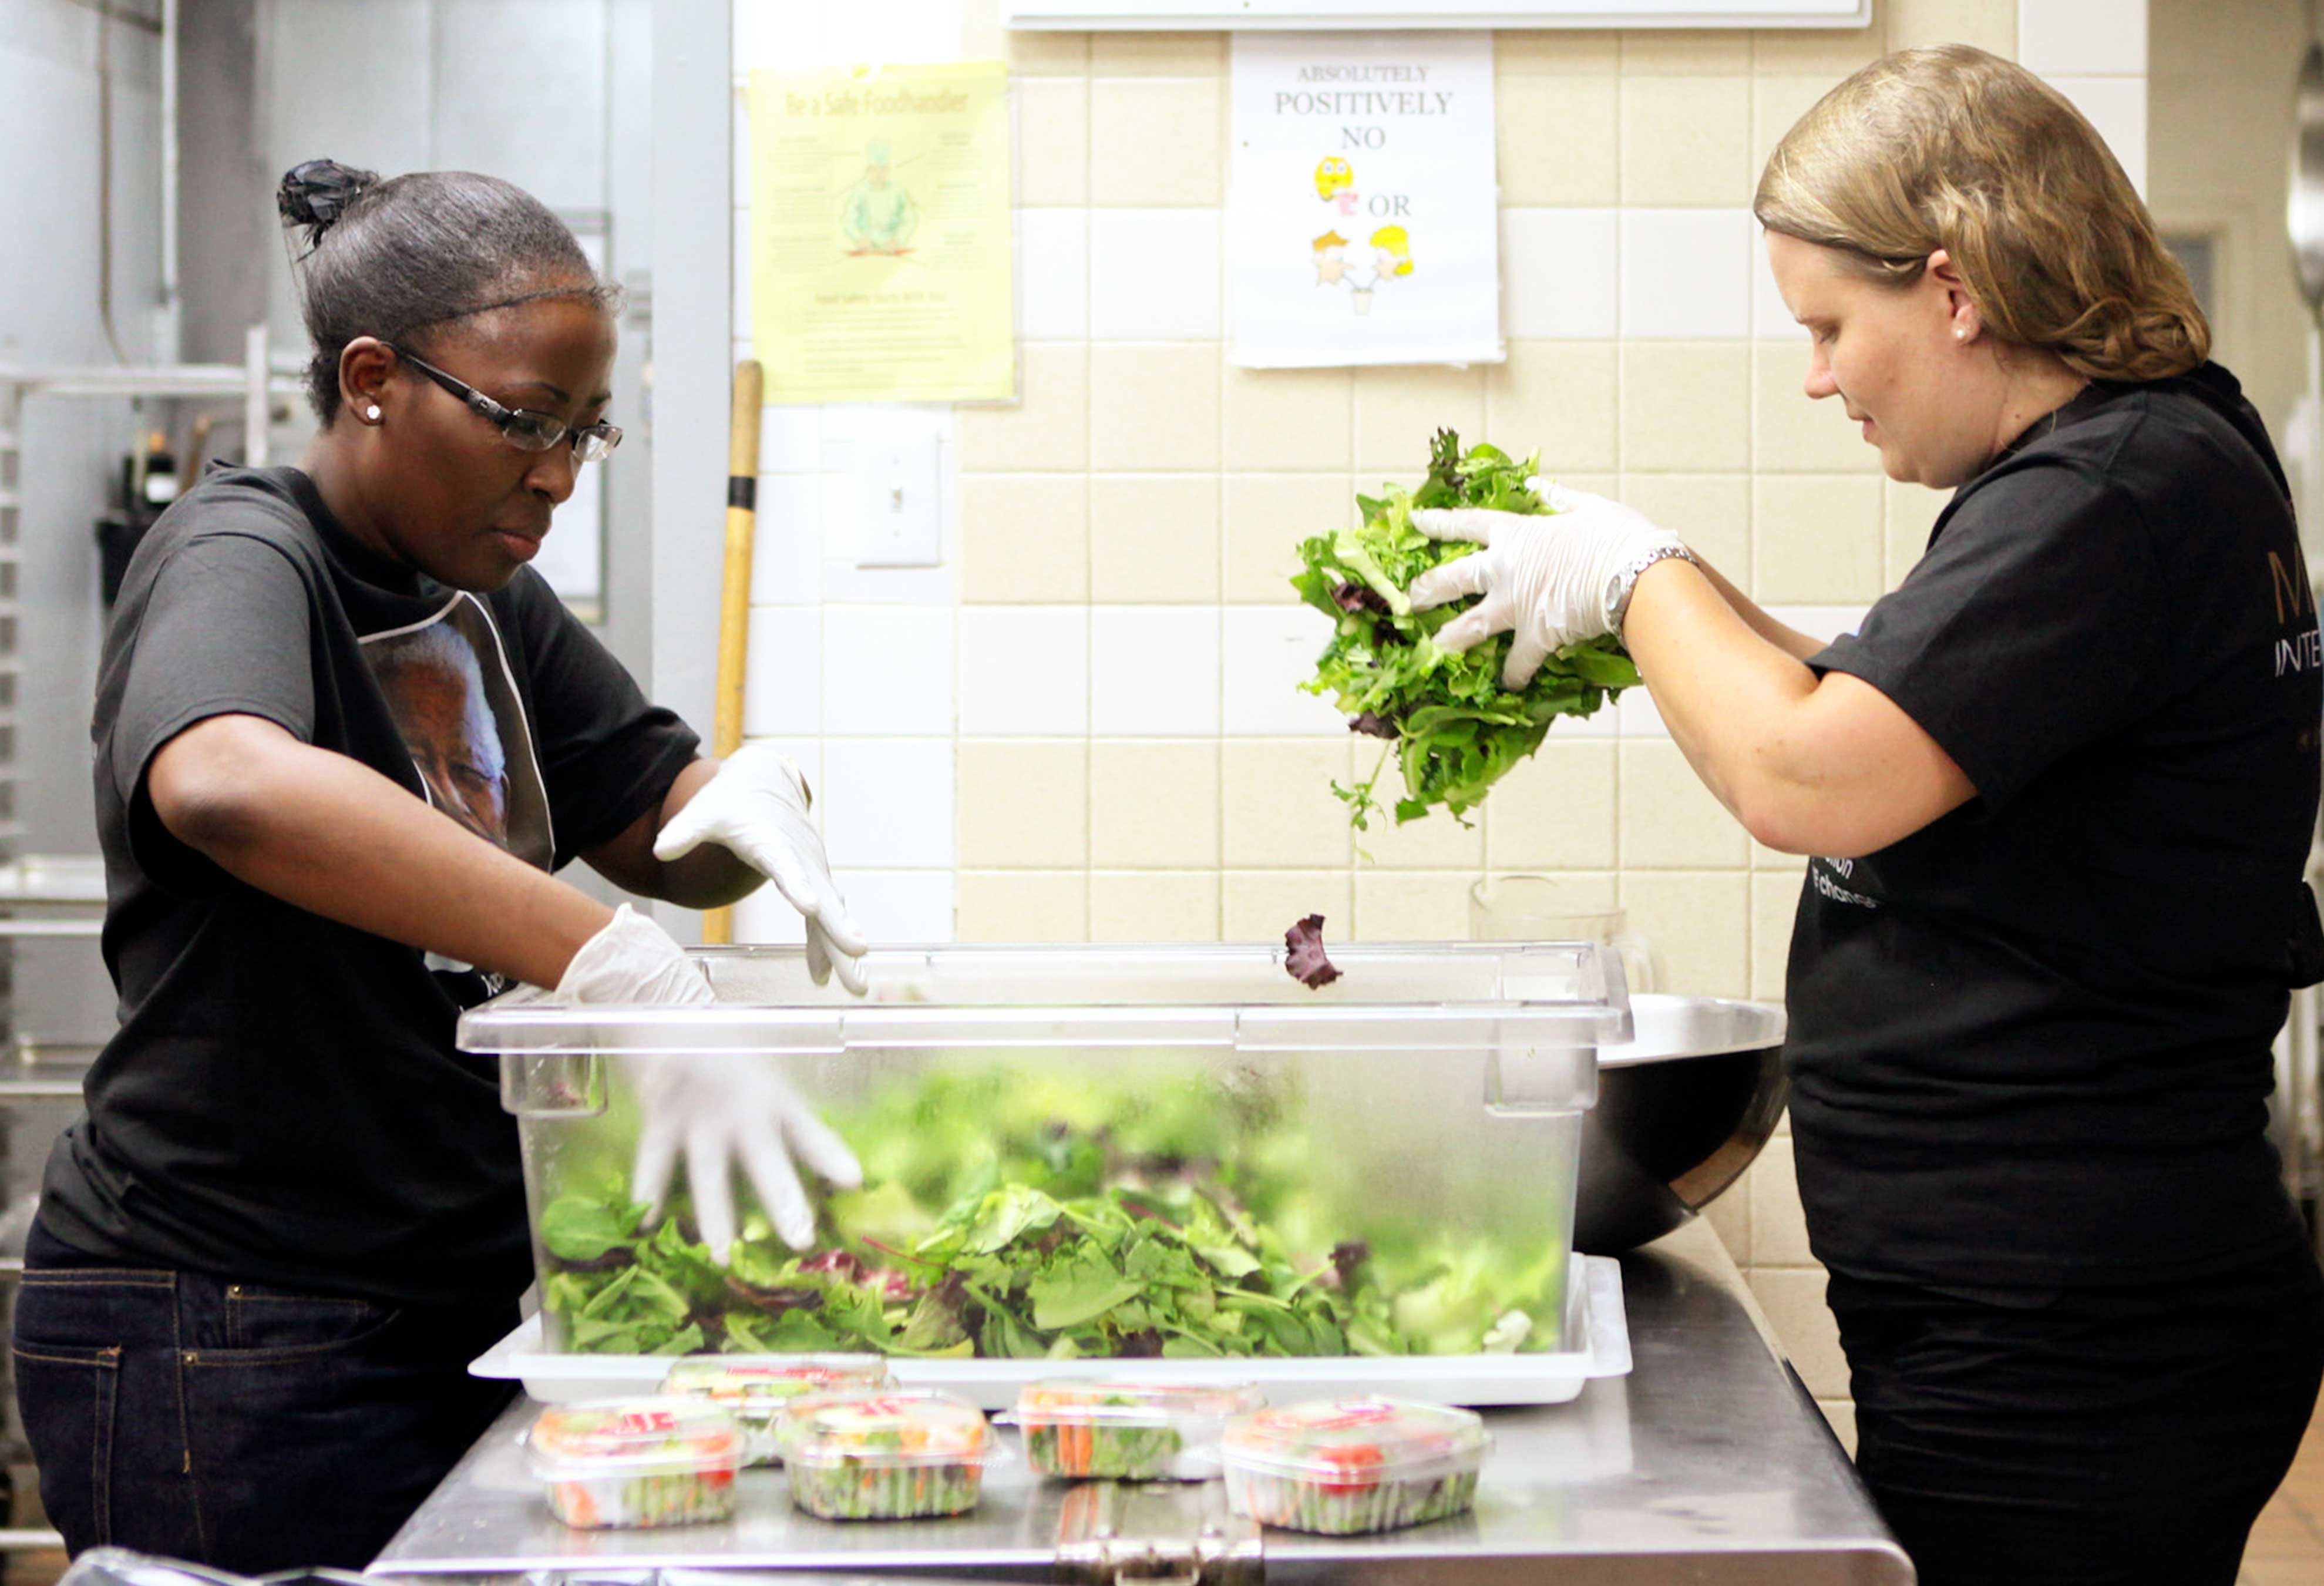 UN staff volunteering their time to prepare food at the Bowery Mission Soup Kitchen. © Africa Renewal/Bo Li